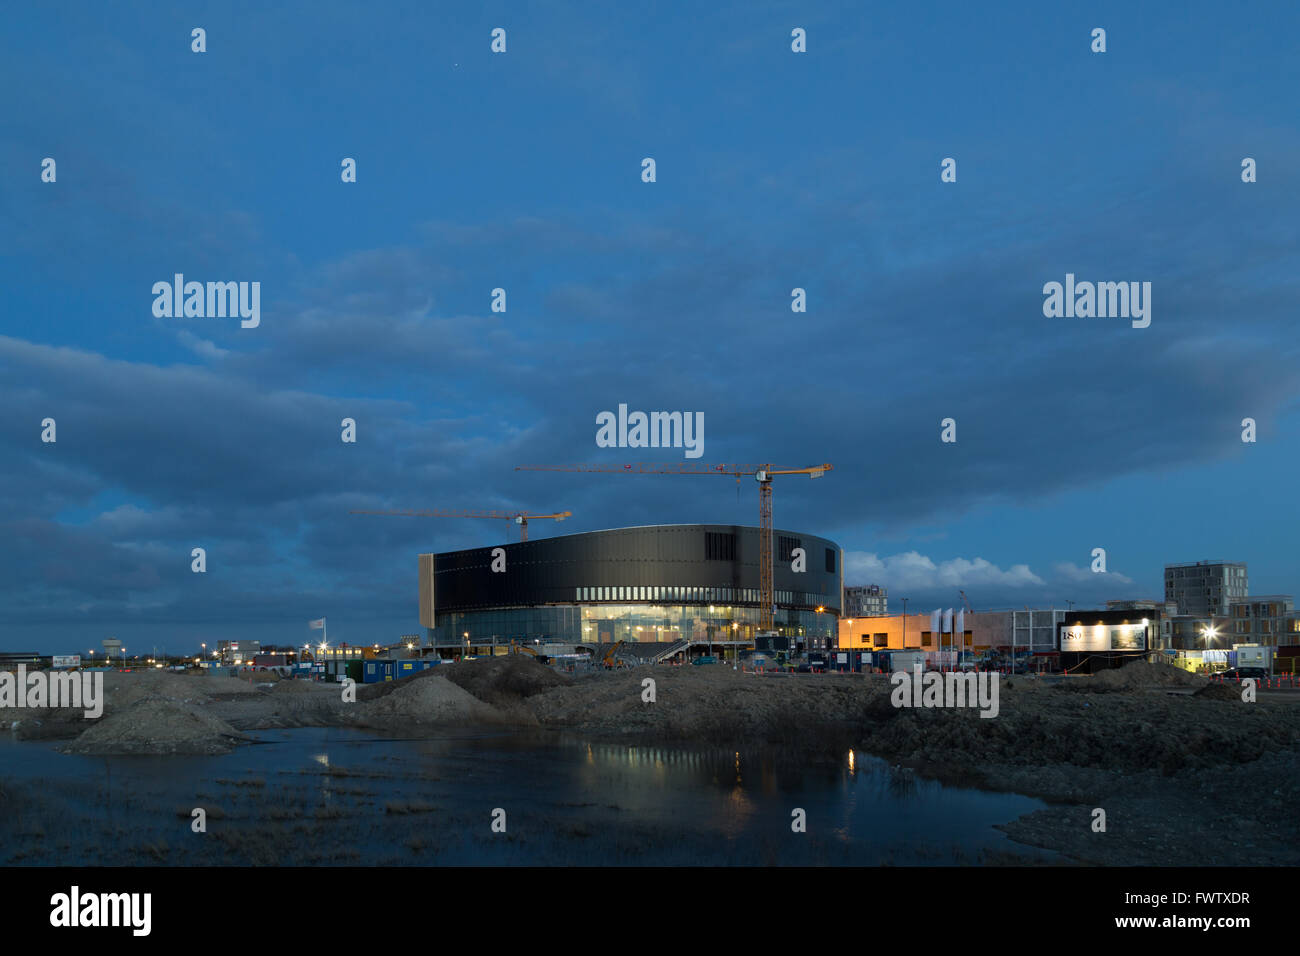 Copenhagen, Denmark - April 07, 2016: Construction of the Royal Arena, an upcoming multi-use indoor arena. Stock Photo